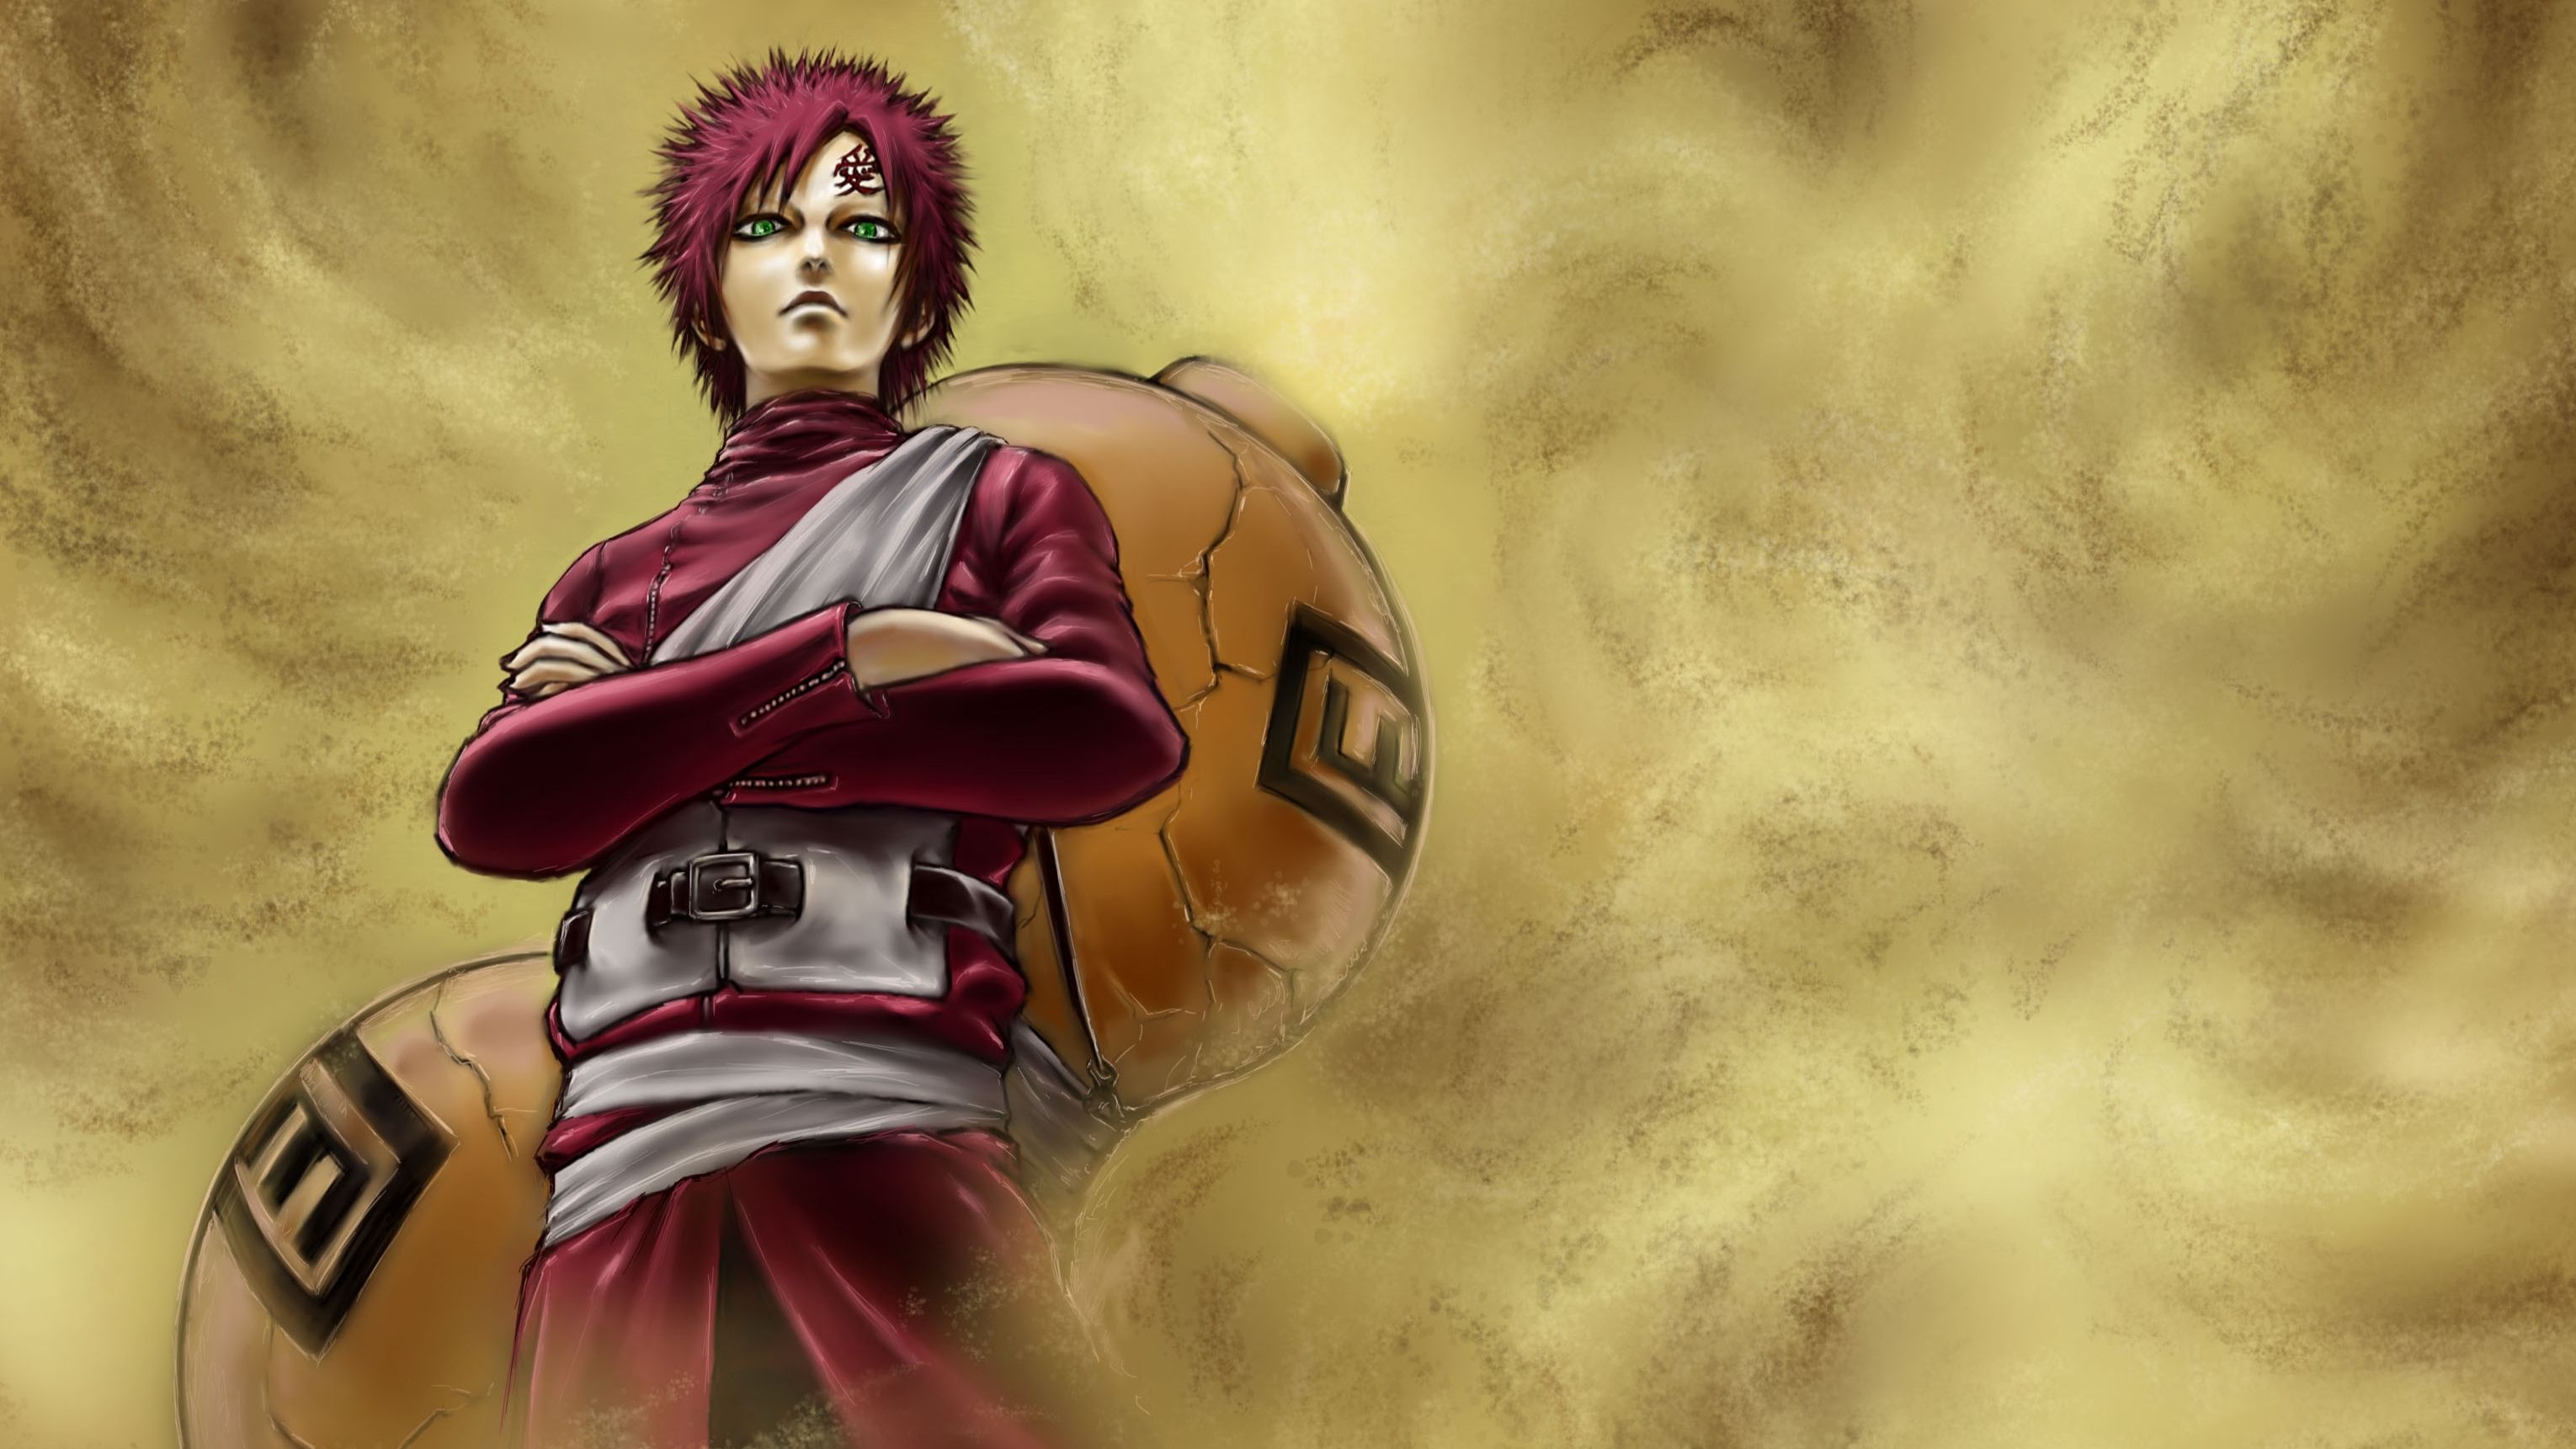 Gaara in Naruto Wallpaper, HD Anime 4K Wallpaper, Image, Photo and Background